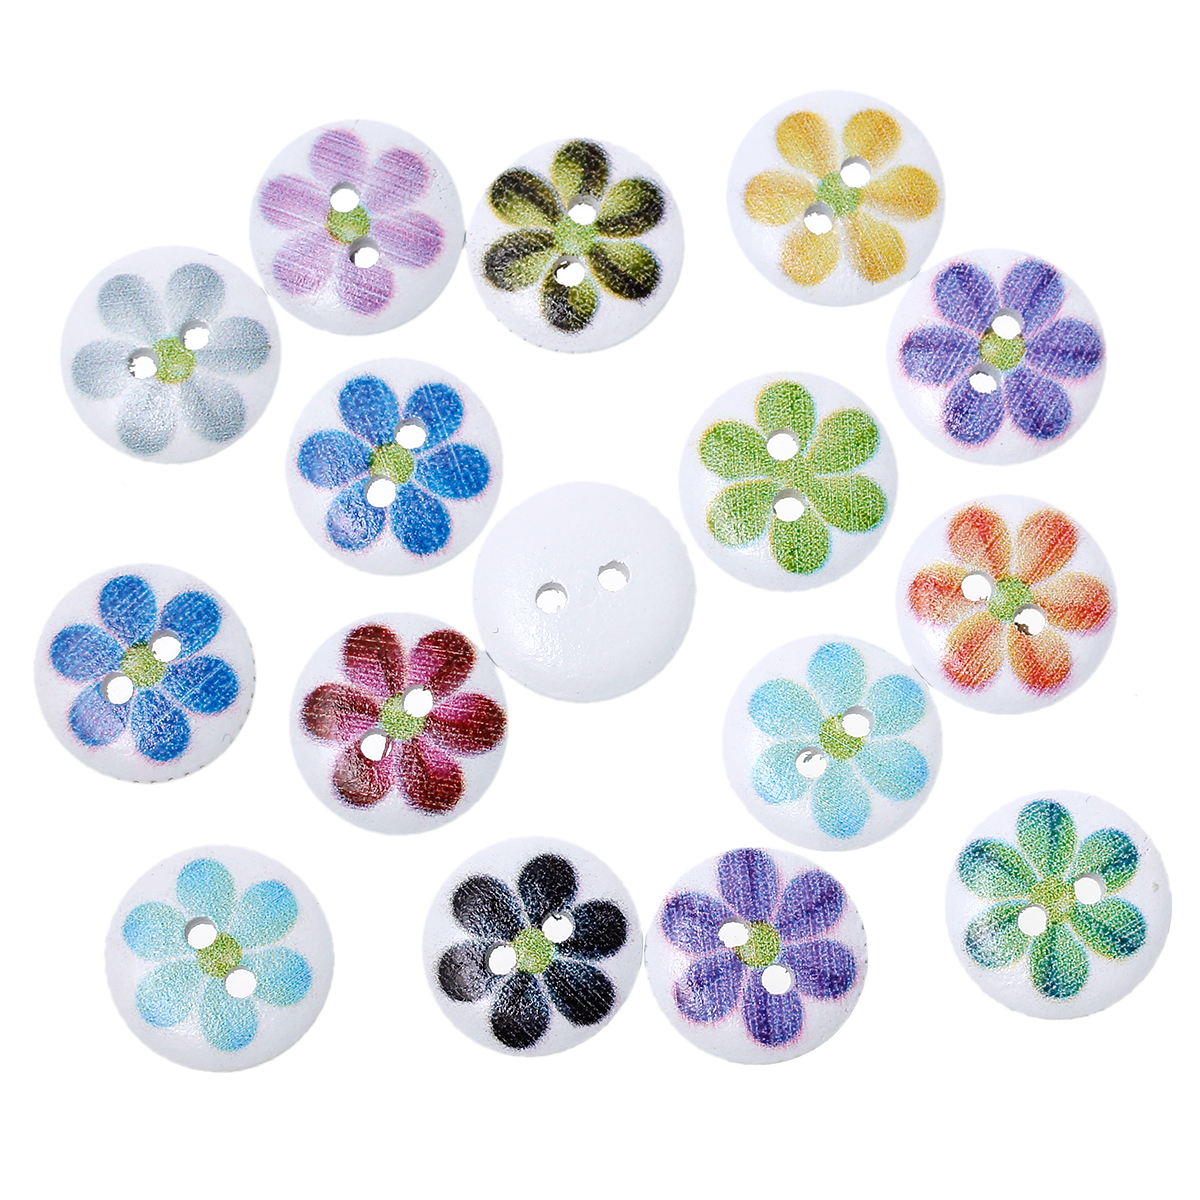 Picture of Wood Sewing Buttons Scrapbooking Round At Random 2 Holes Flower Pattern 15mm( 5/8") Dia, 100 PCs